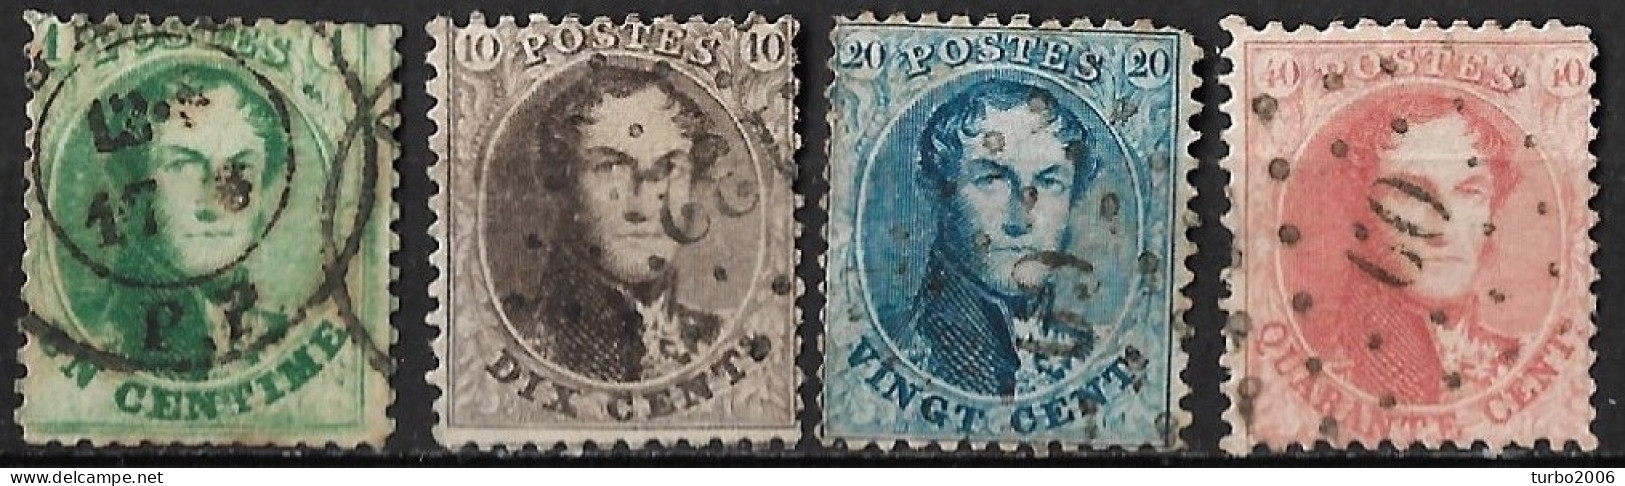 Belgium 1863 Leopold I Médaillons Perforated Complete Used Set Michel 10 A - 11 A - 12 B - 13 B - 1863-1864 Medallions (13/16)